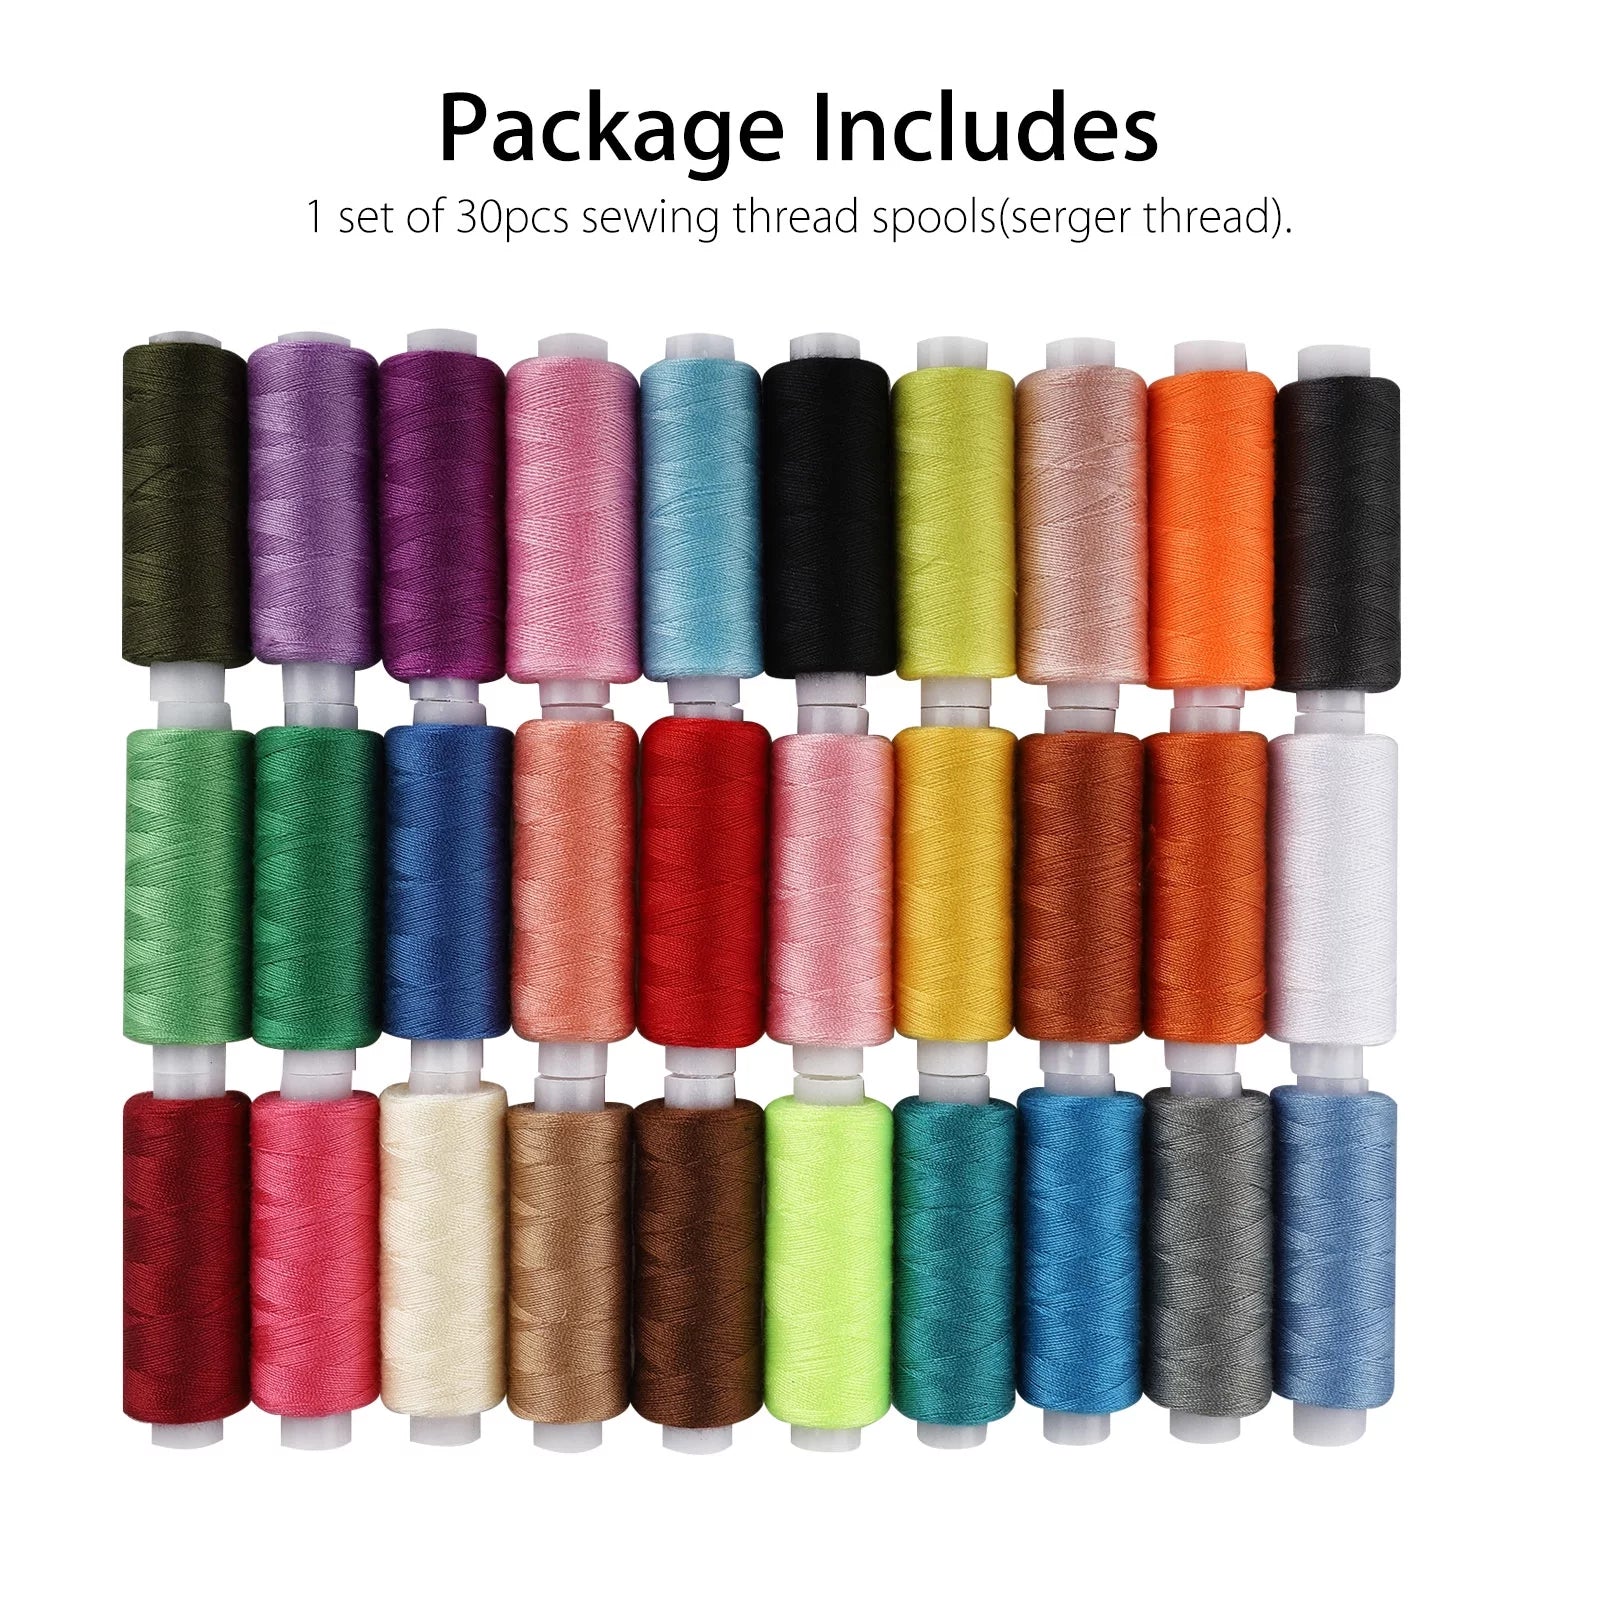 30-Color Sewing Thread Kit: Celectigo 250 Yards Polyester Spools Assortment for Crafts, Clothing, Embroidery - Pink, Blue, Black, Red, Yellow, Orange, White, Green